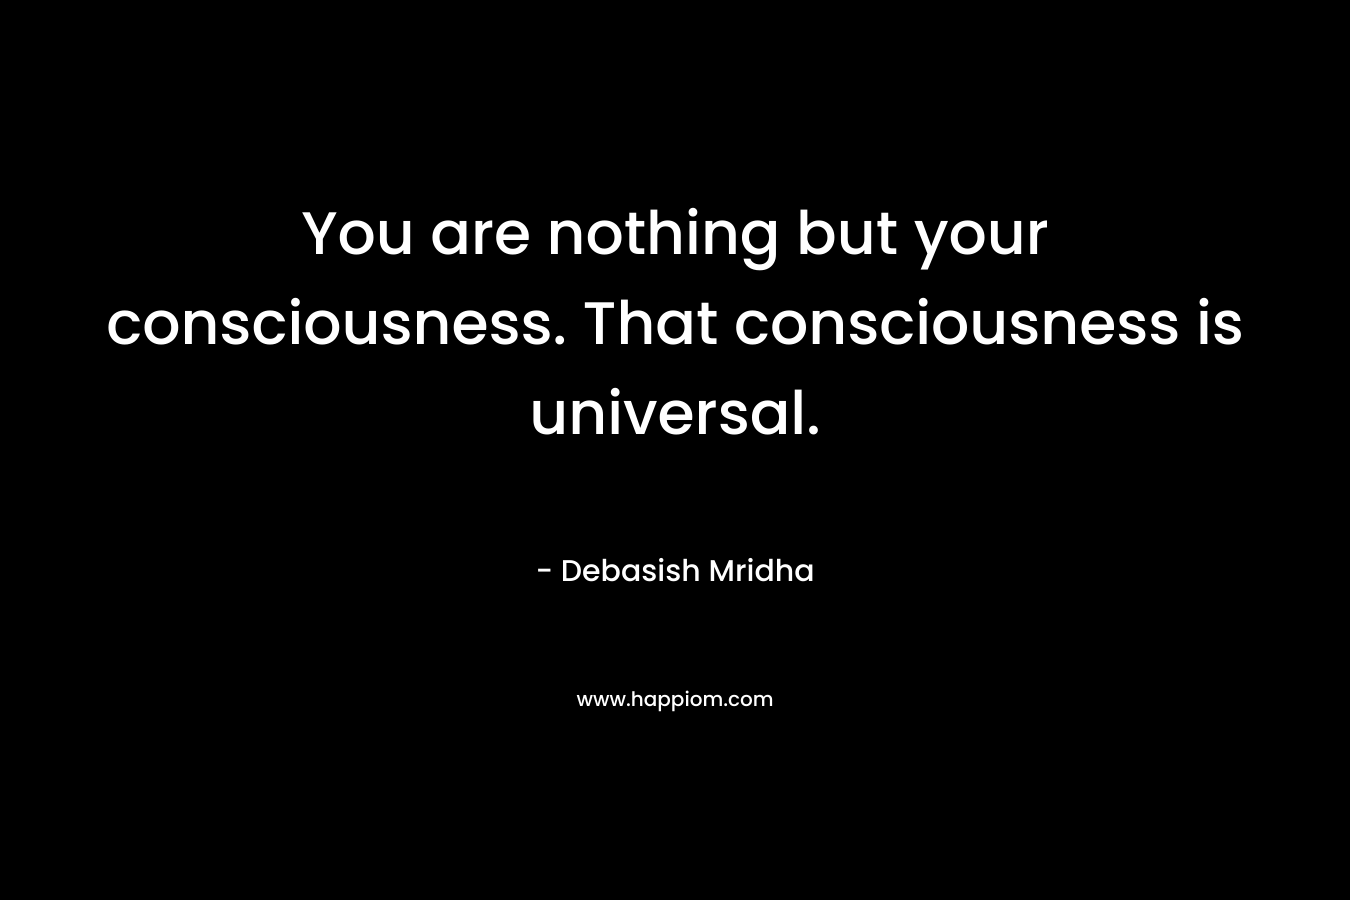 You are nothing but your consciousness. That consciousness is universal.